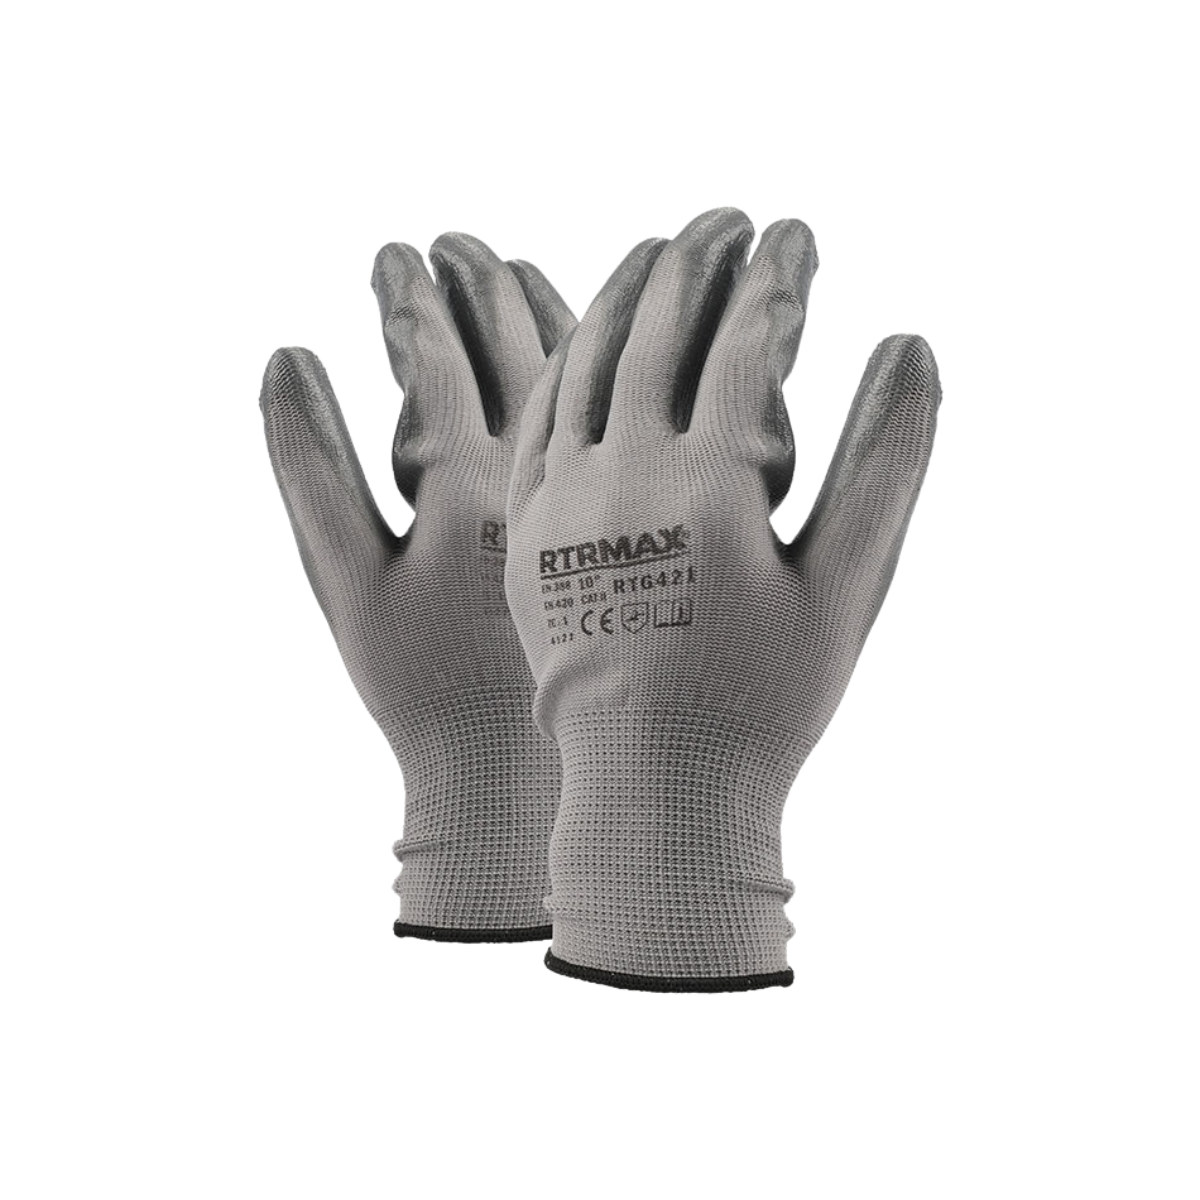 RTRMAX - RTG421 - Nitrile Glove 10 Grey Color with Grey Poly